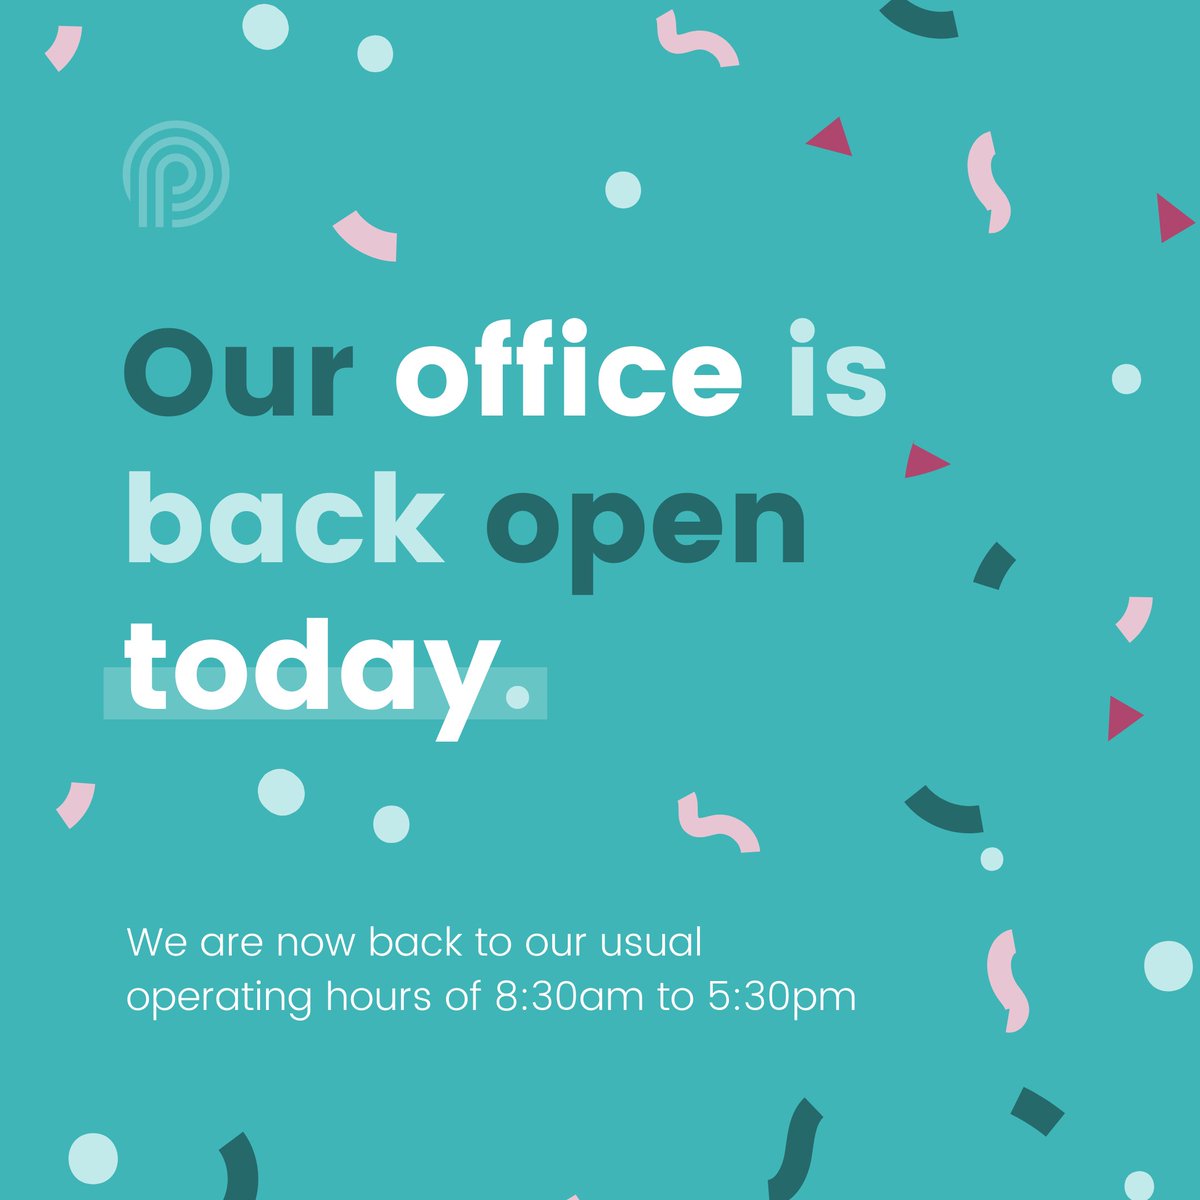 🎉 We're back! 🎉

Our offices are back open and operating at our usual hours of 8:30am to 5:30pm.

We hope you all enjoyed the holidays, and we can't wait to see what this new year will bring for us. 😊

#PerfectPortal #LegalTech #ClientOnboarding